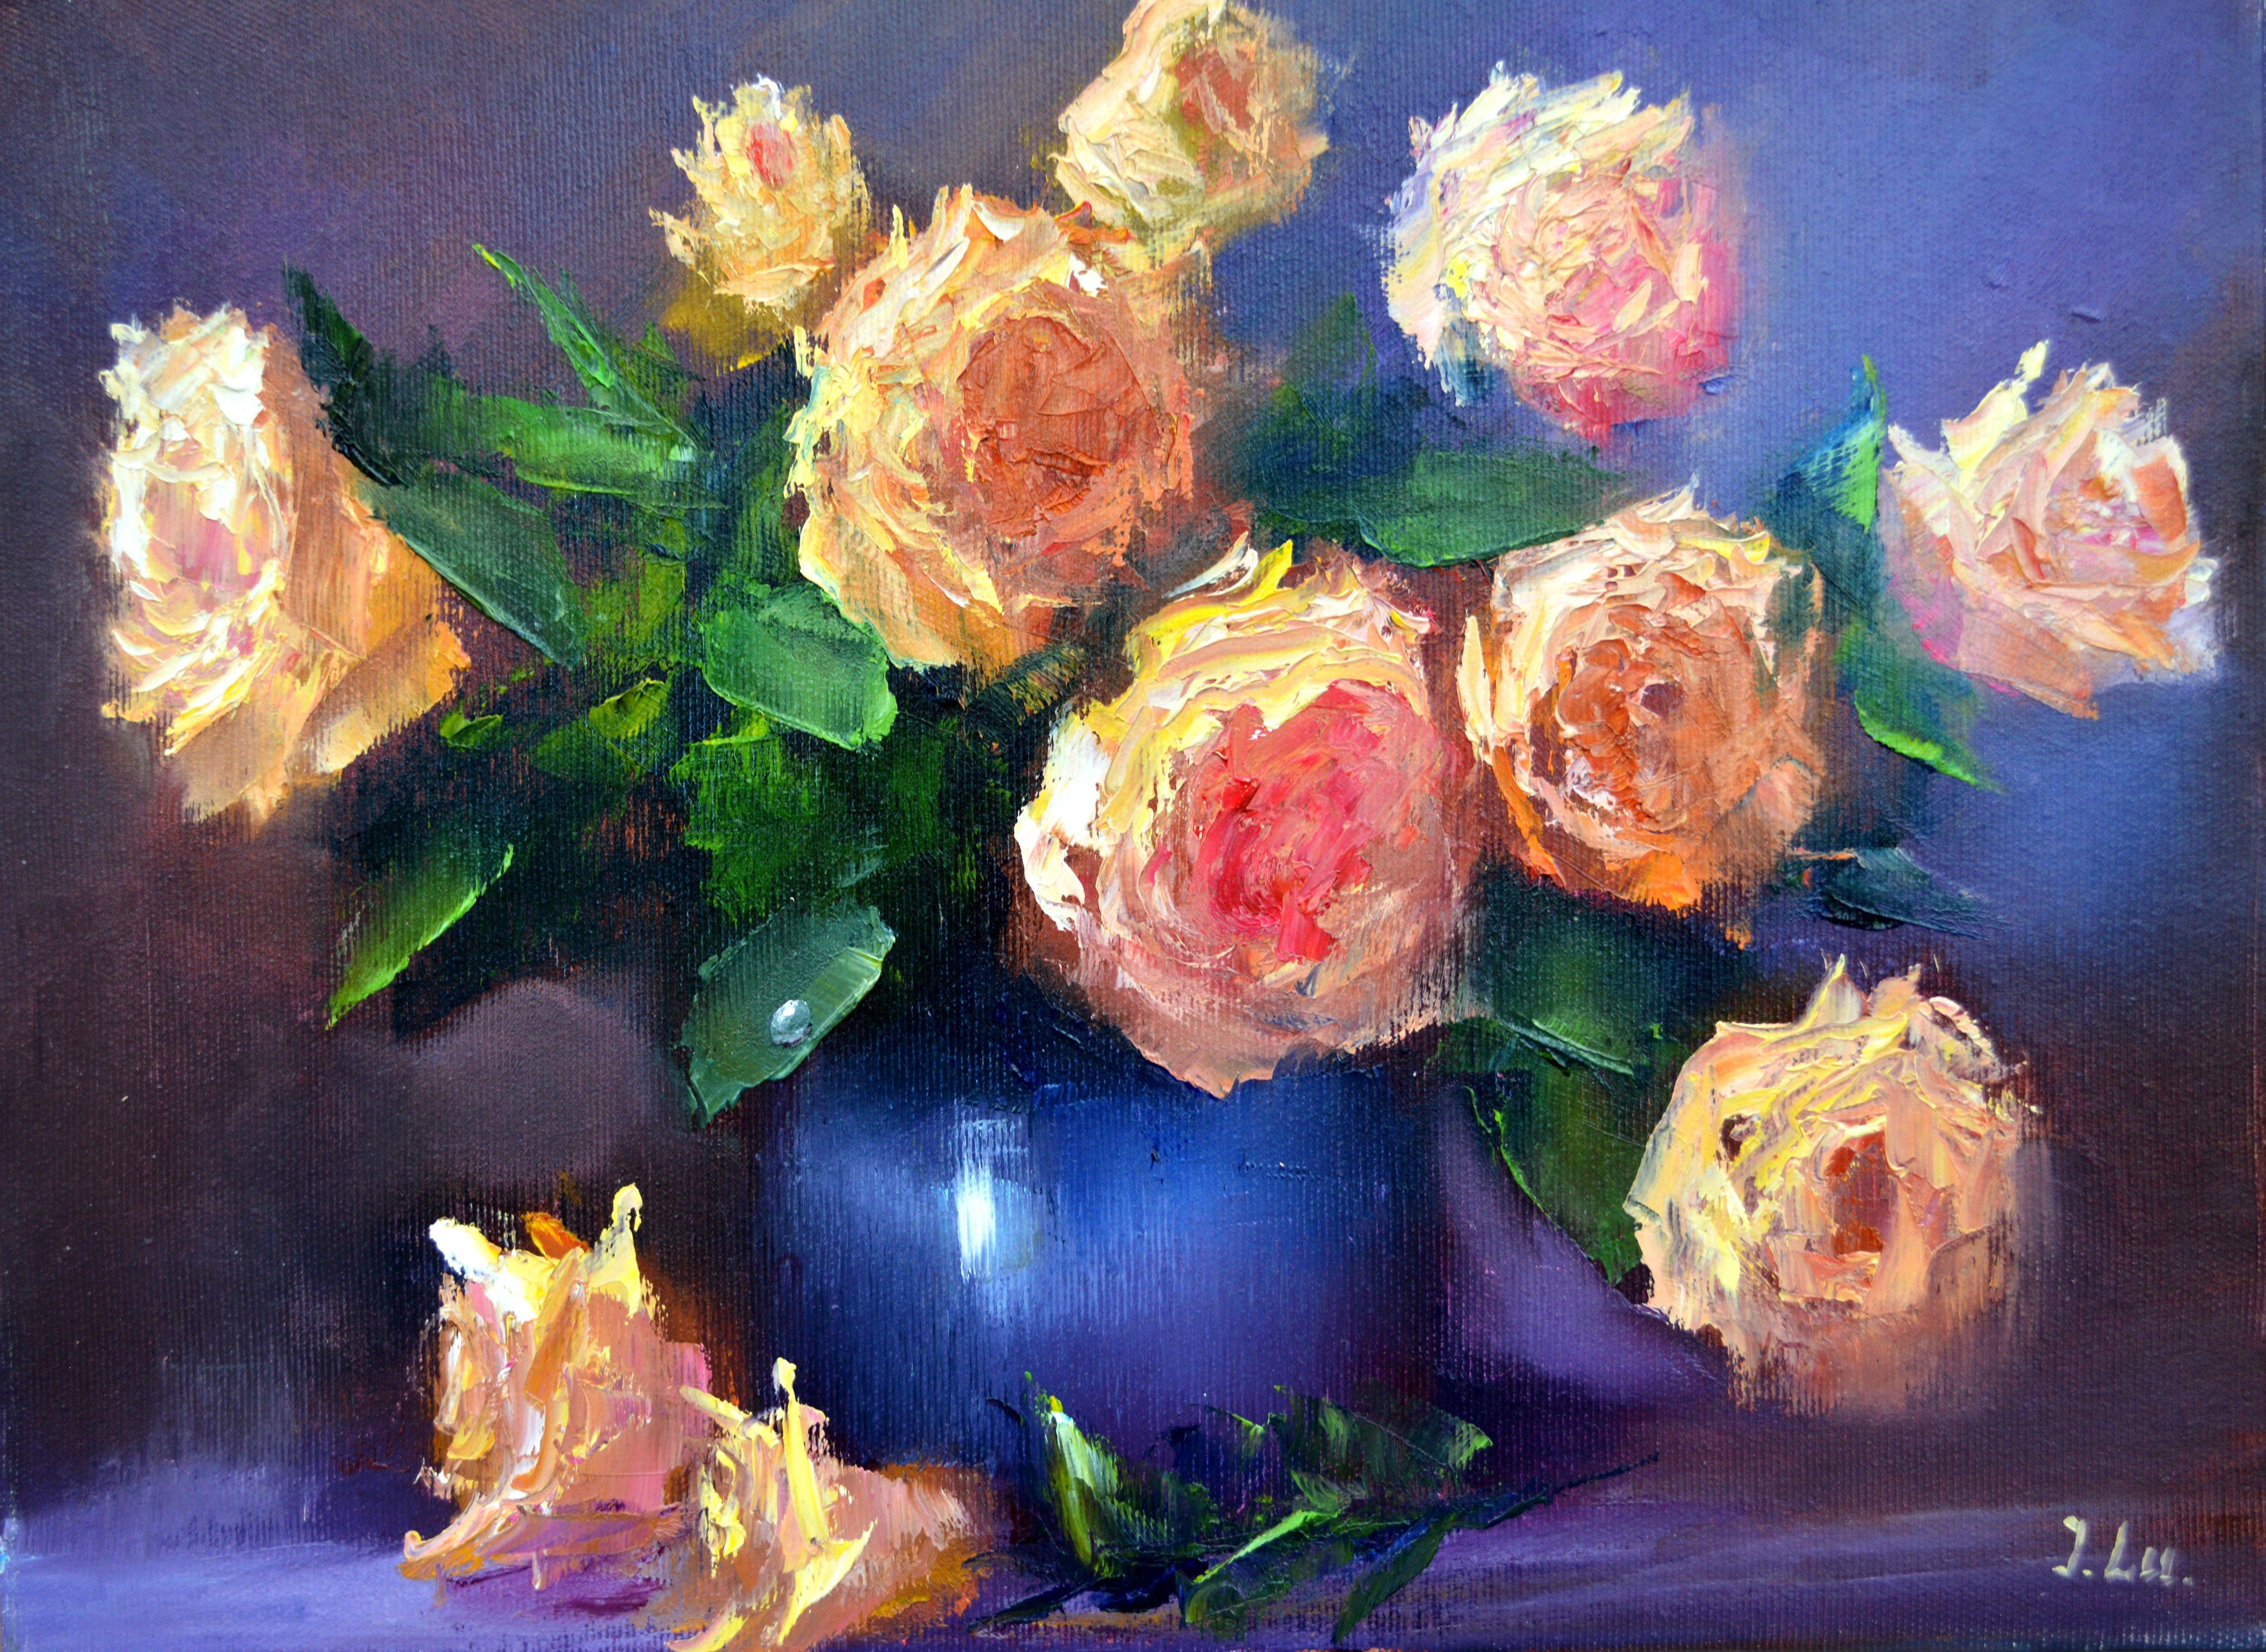 Elena Lukina Interior Painting - Yellow roses in a blue vase